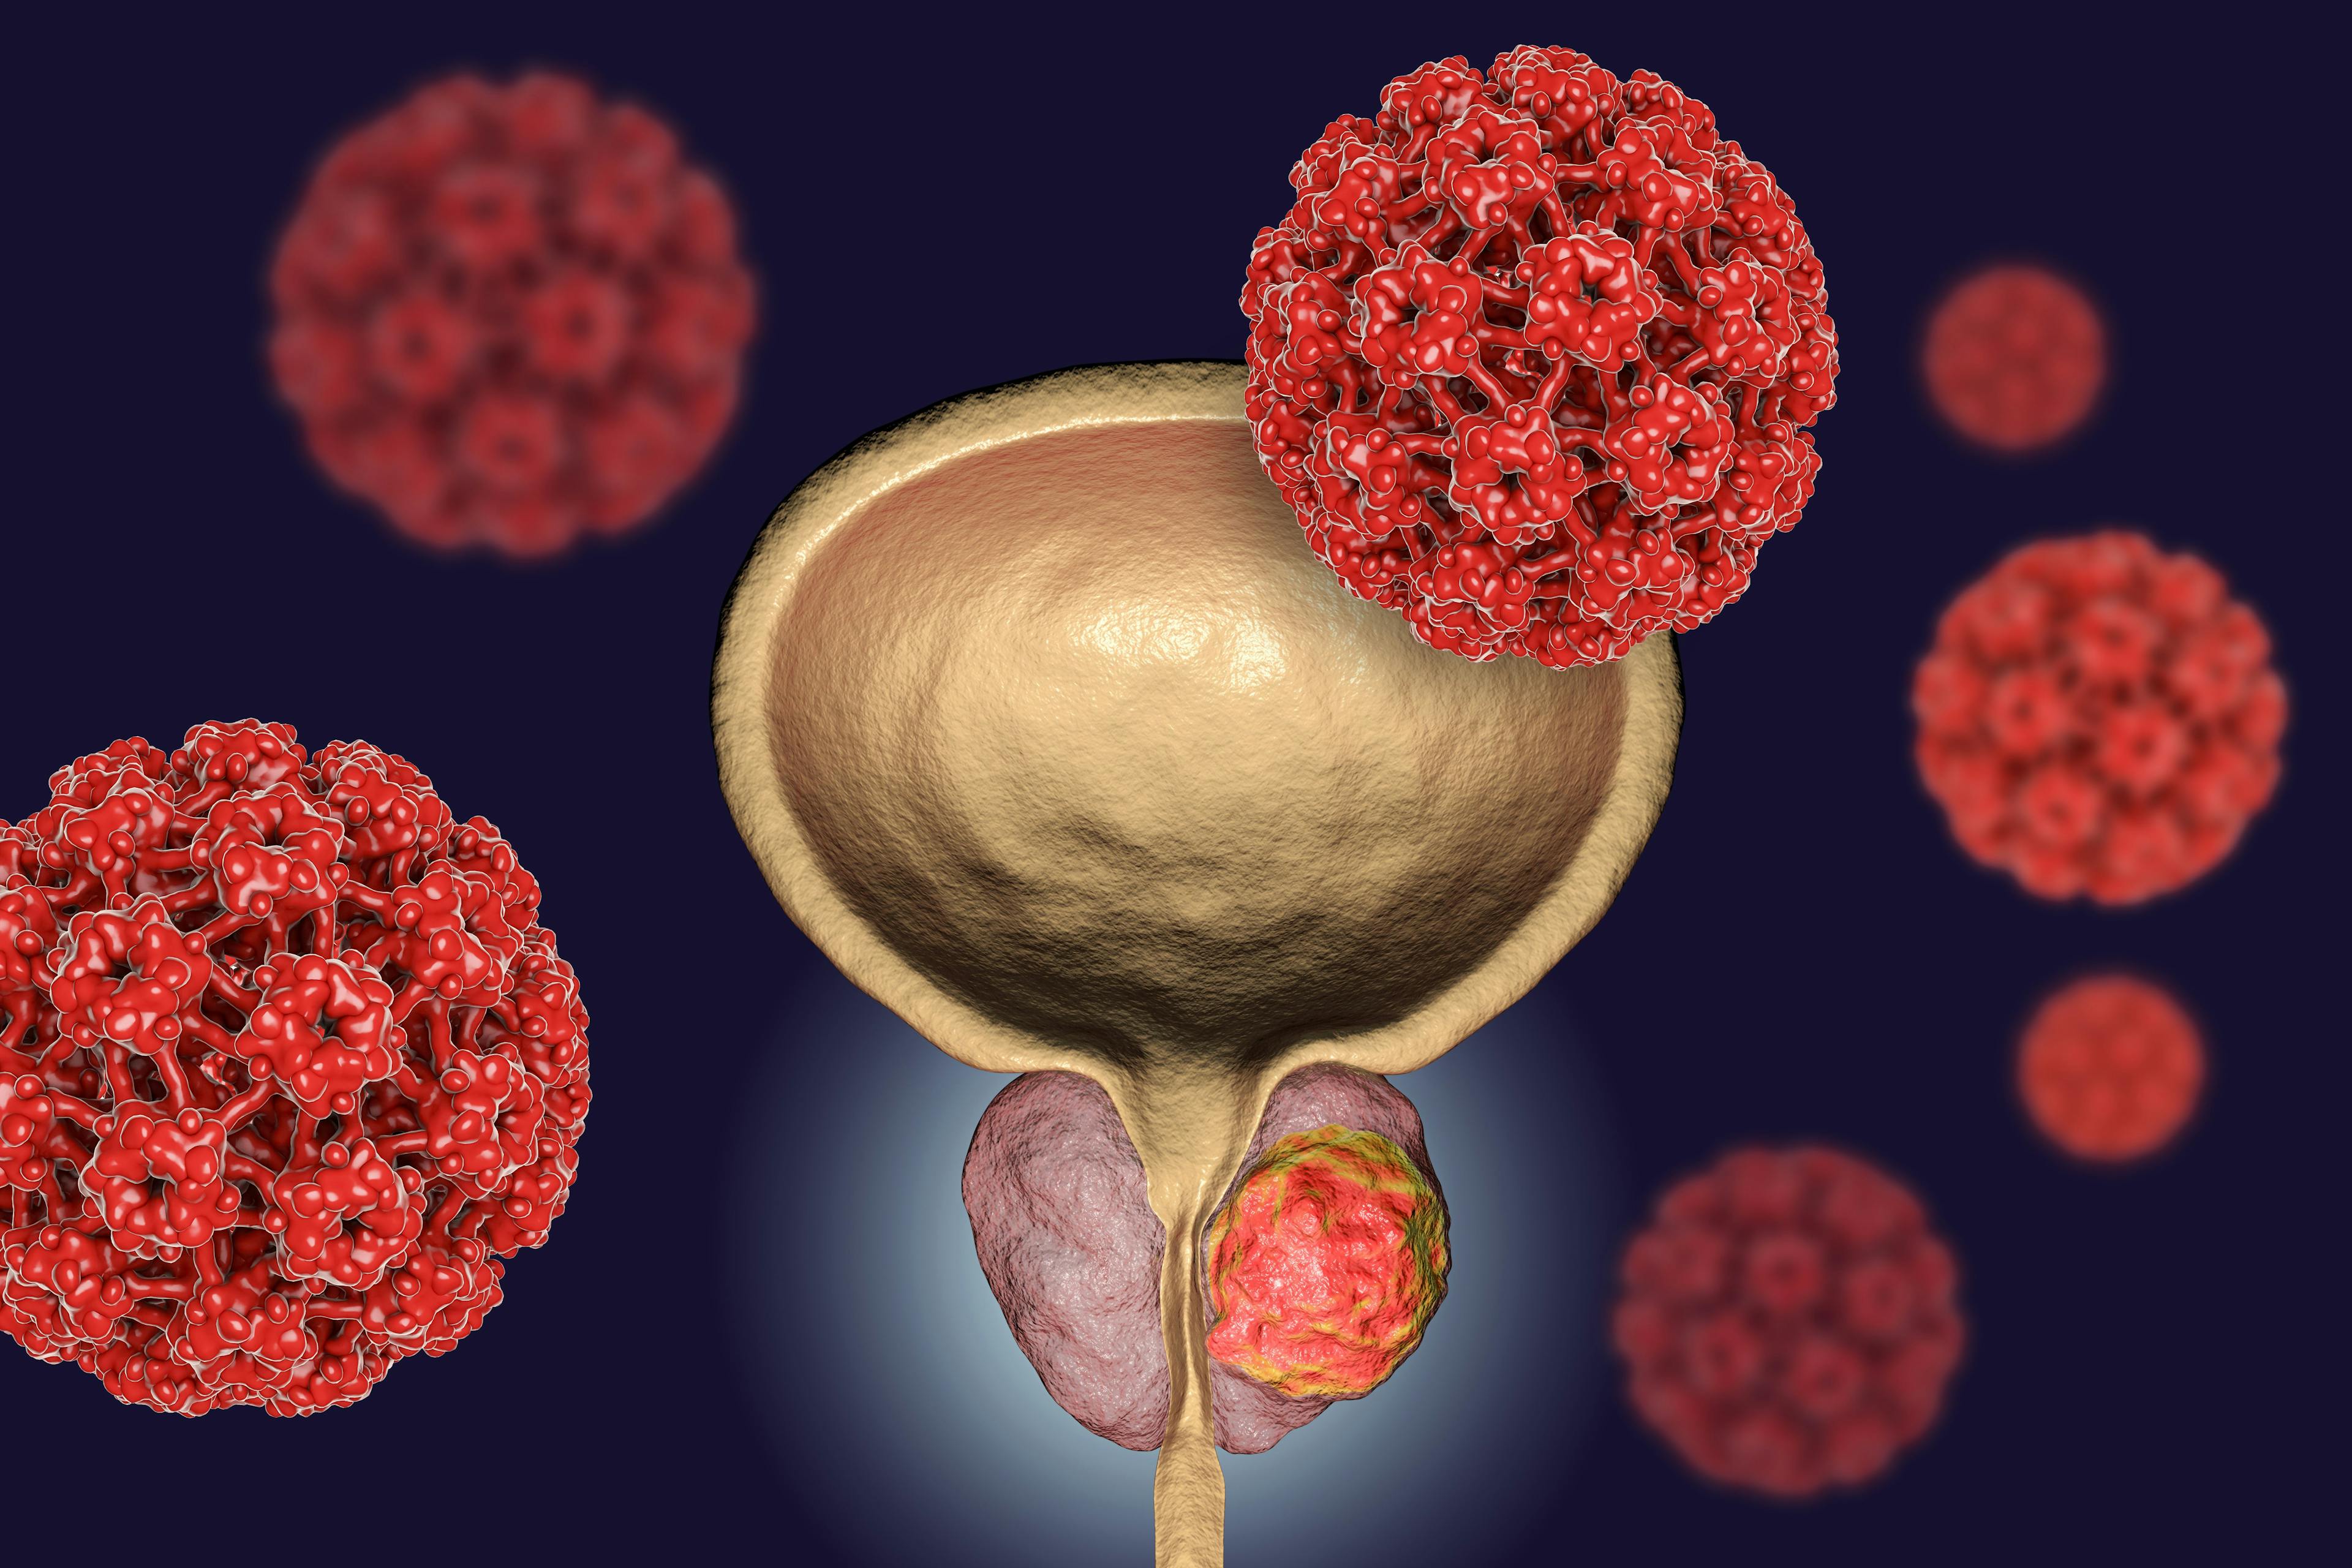 Adjuvant Radiation Therapy Associated with Reduced Risk of Death in High-Risk Prostate Cancer